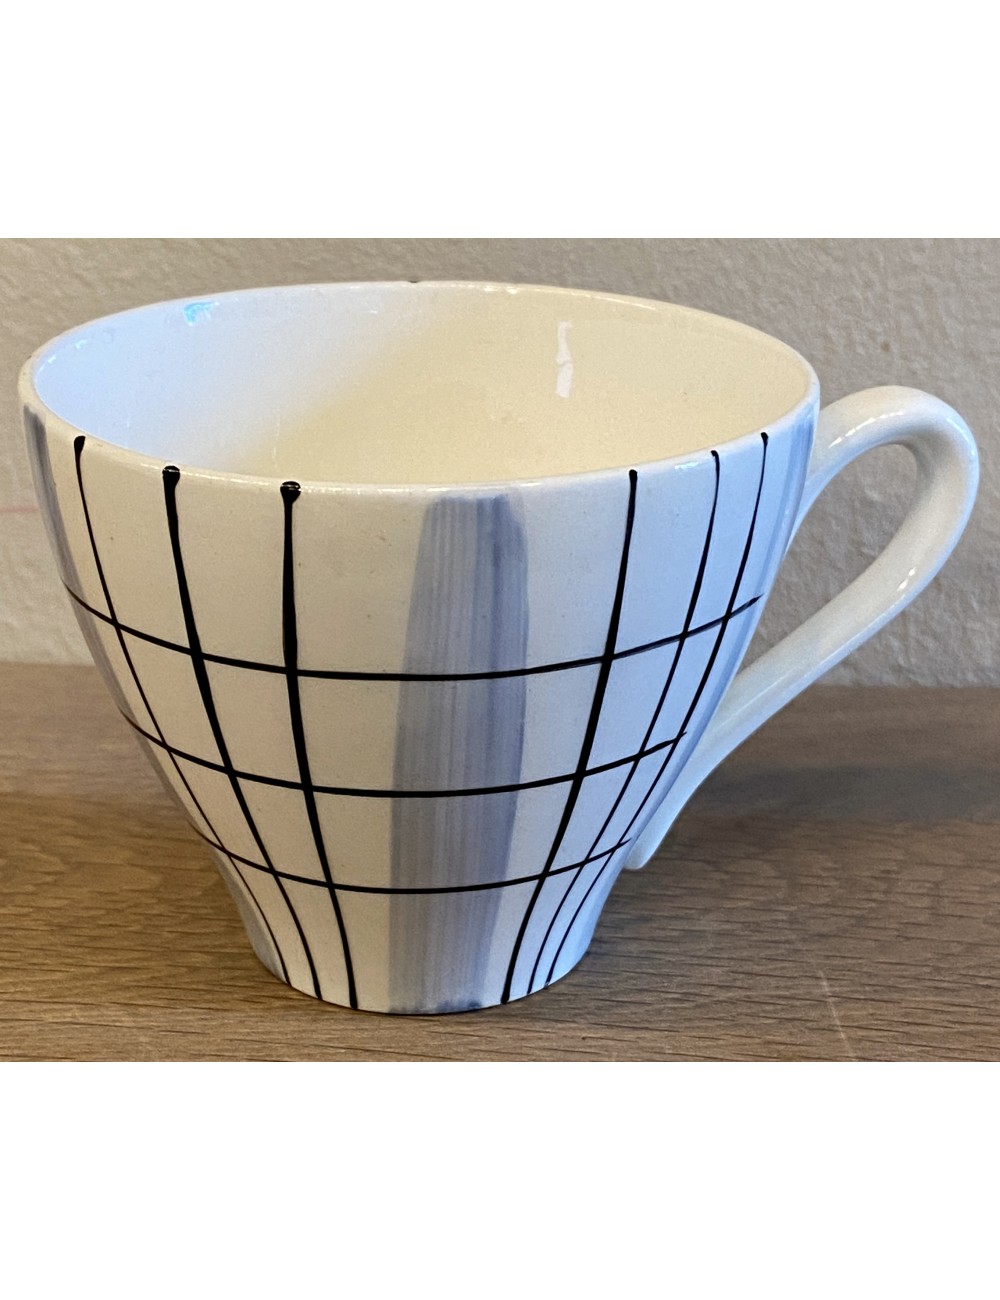 Cup - unmarked but Petrus Regout - model JOLANDA (?) executed in gray-blue